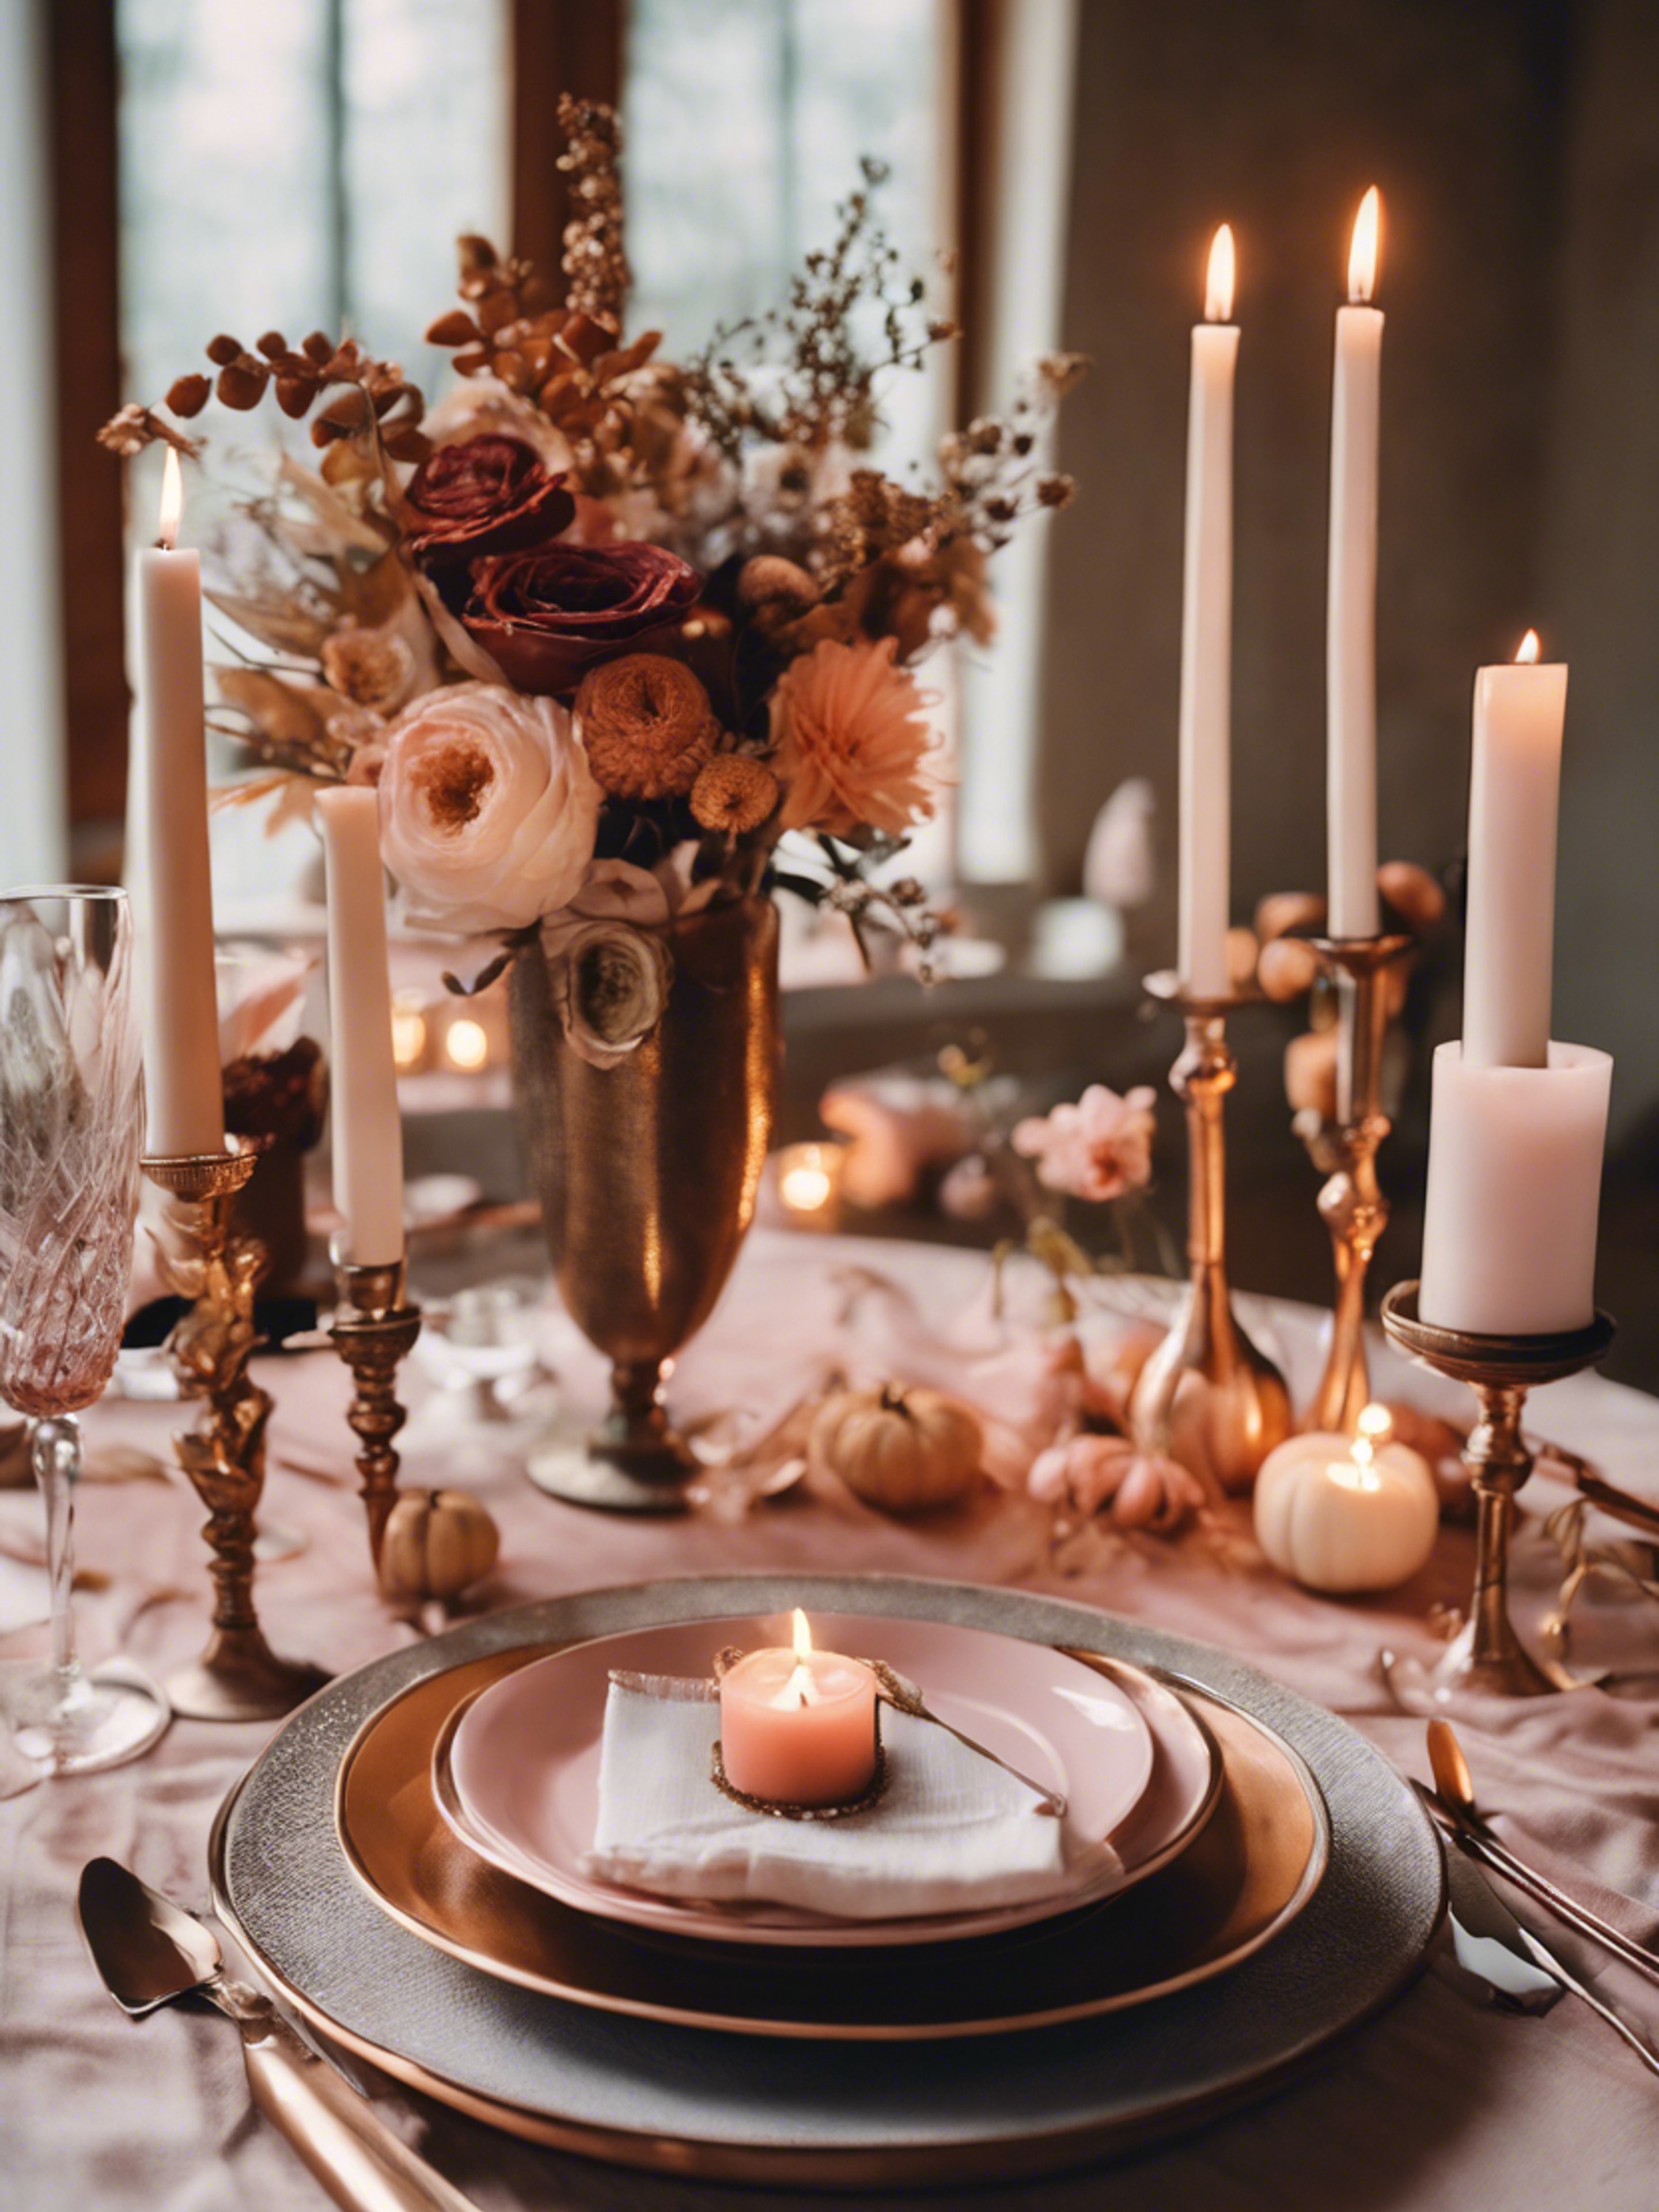 A romantic Thanksgiving tablescape for two, adorned with blush-colored candles, copper utensils, and a gorgeous floral centerpiece. Шпалери[bc0a53f0db0f4071a53b]